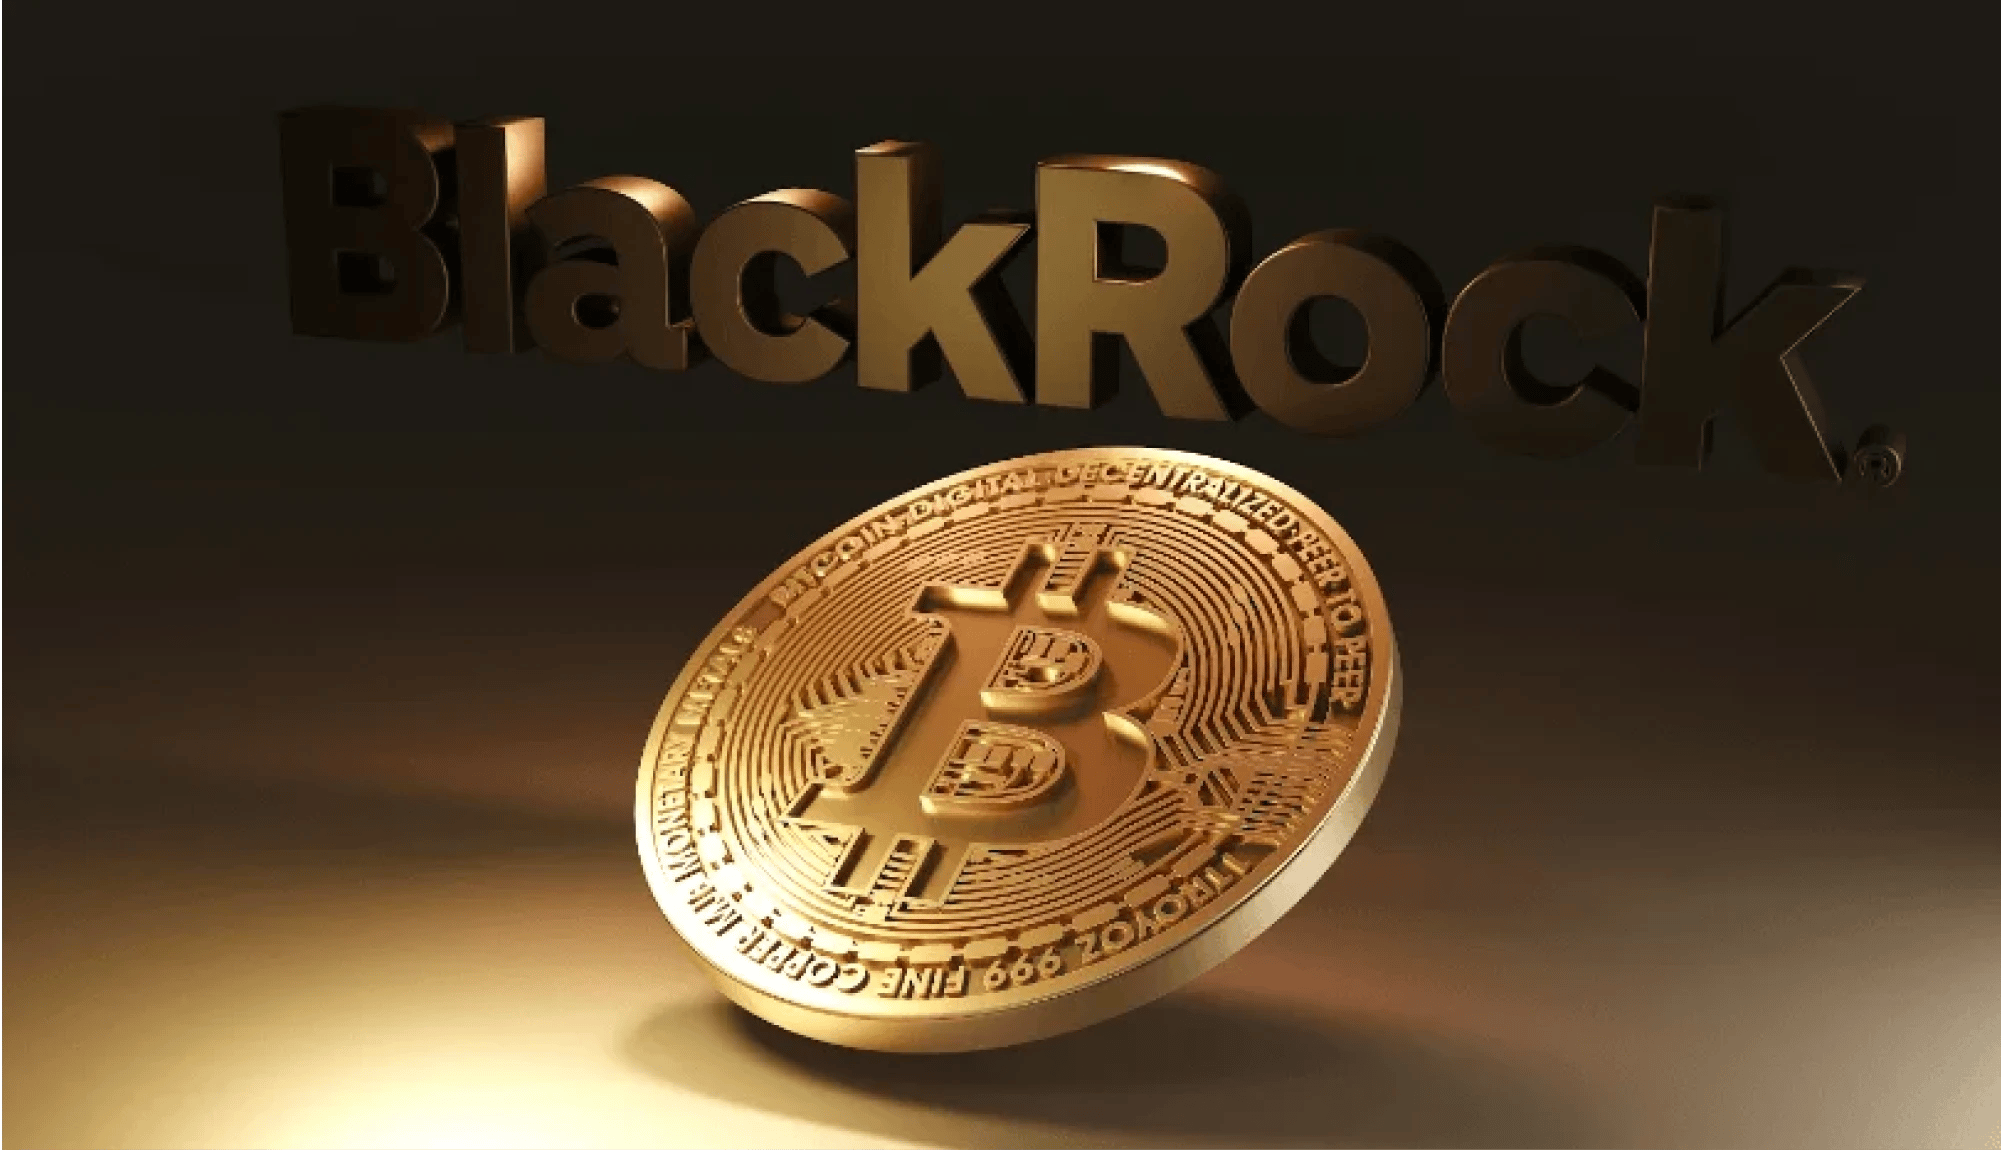 BlackRock’s Bitcoin ETF Initiative: Paving the Way for Mainstream Crypto Investment